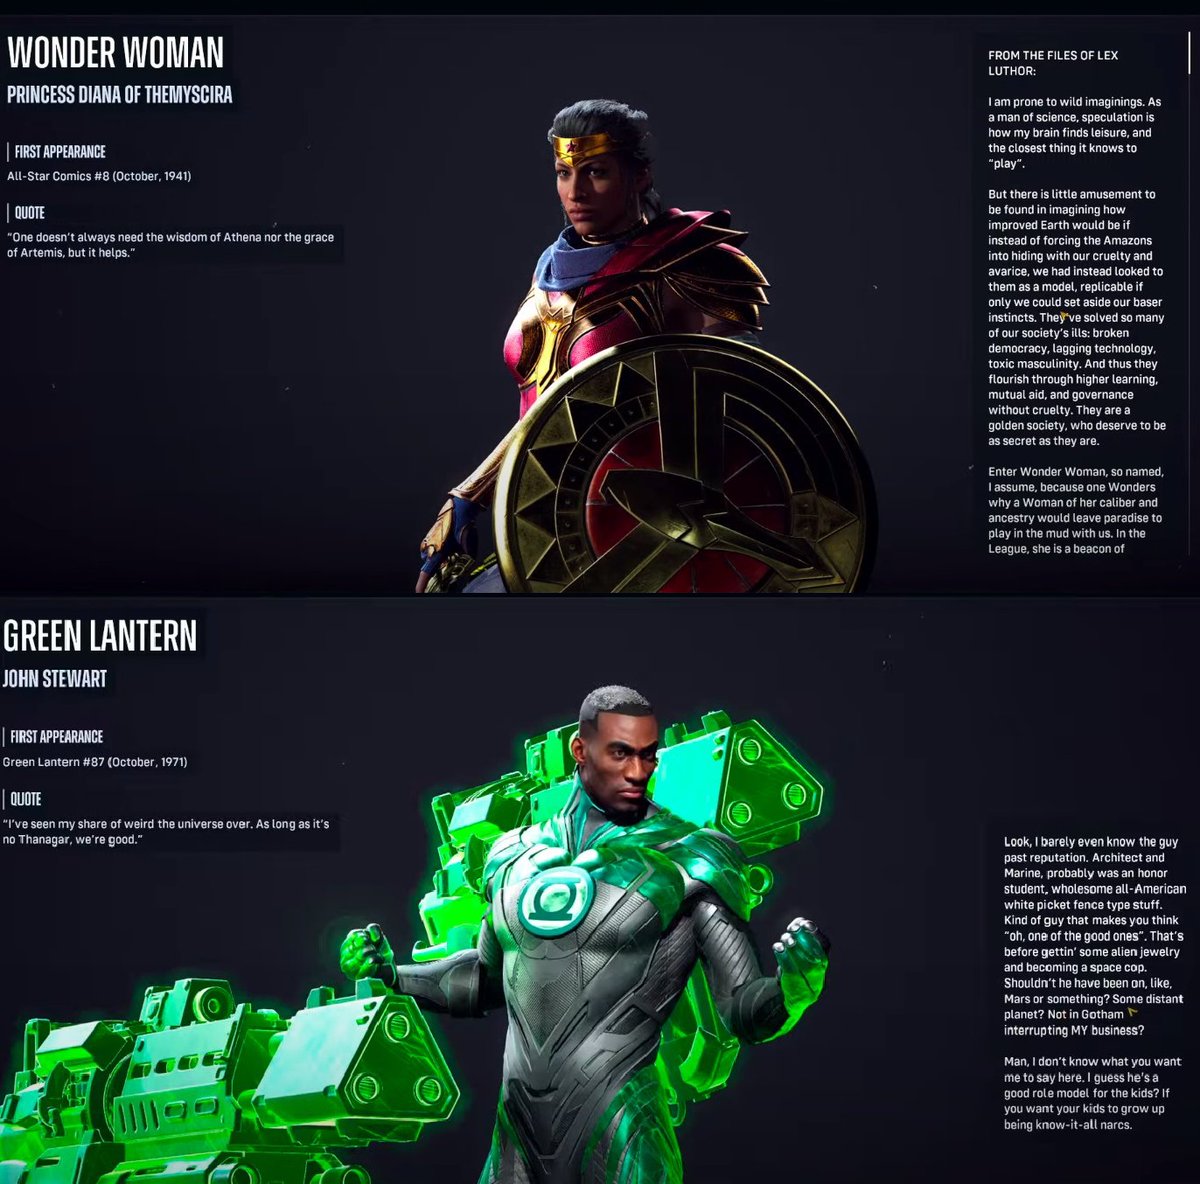 HAHAHAHAHAHAHAH 'TOXIC MASCULINITY'?

GREEN LANTERN is described as shit and Wonder woman is beautifully crafted in Suicide Squad

This is a feminist game and normies told us we were crazy. This fucking game is ideologically driven

Try to gaslight this one progressives